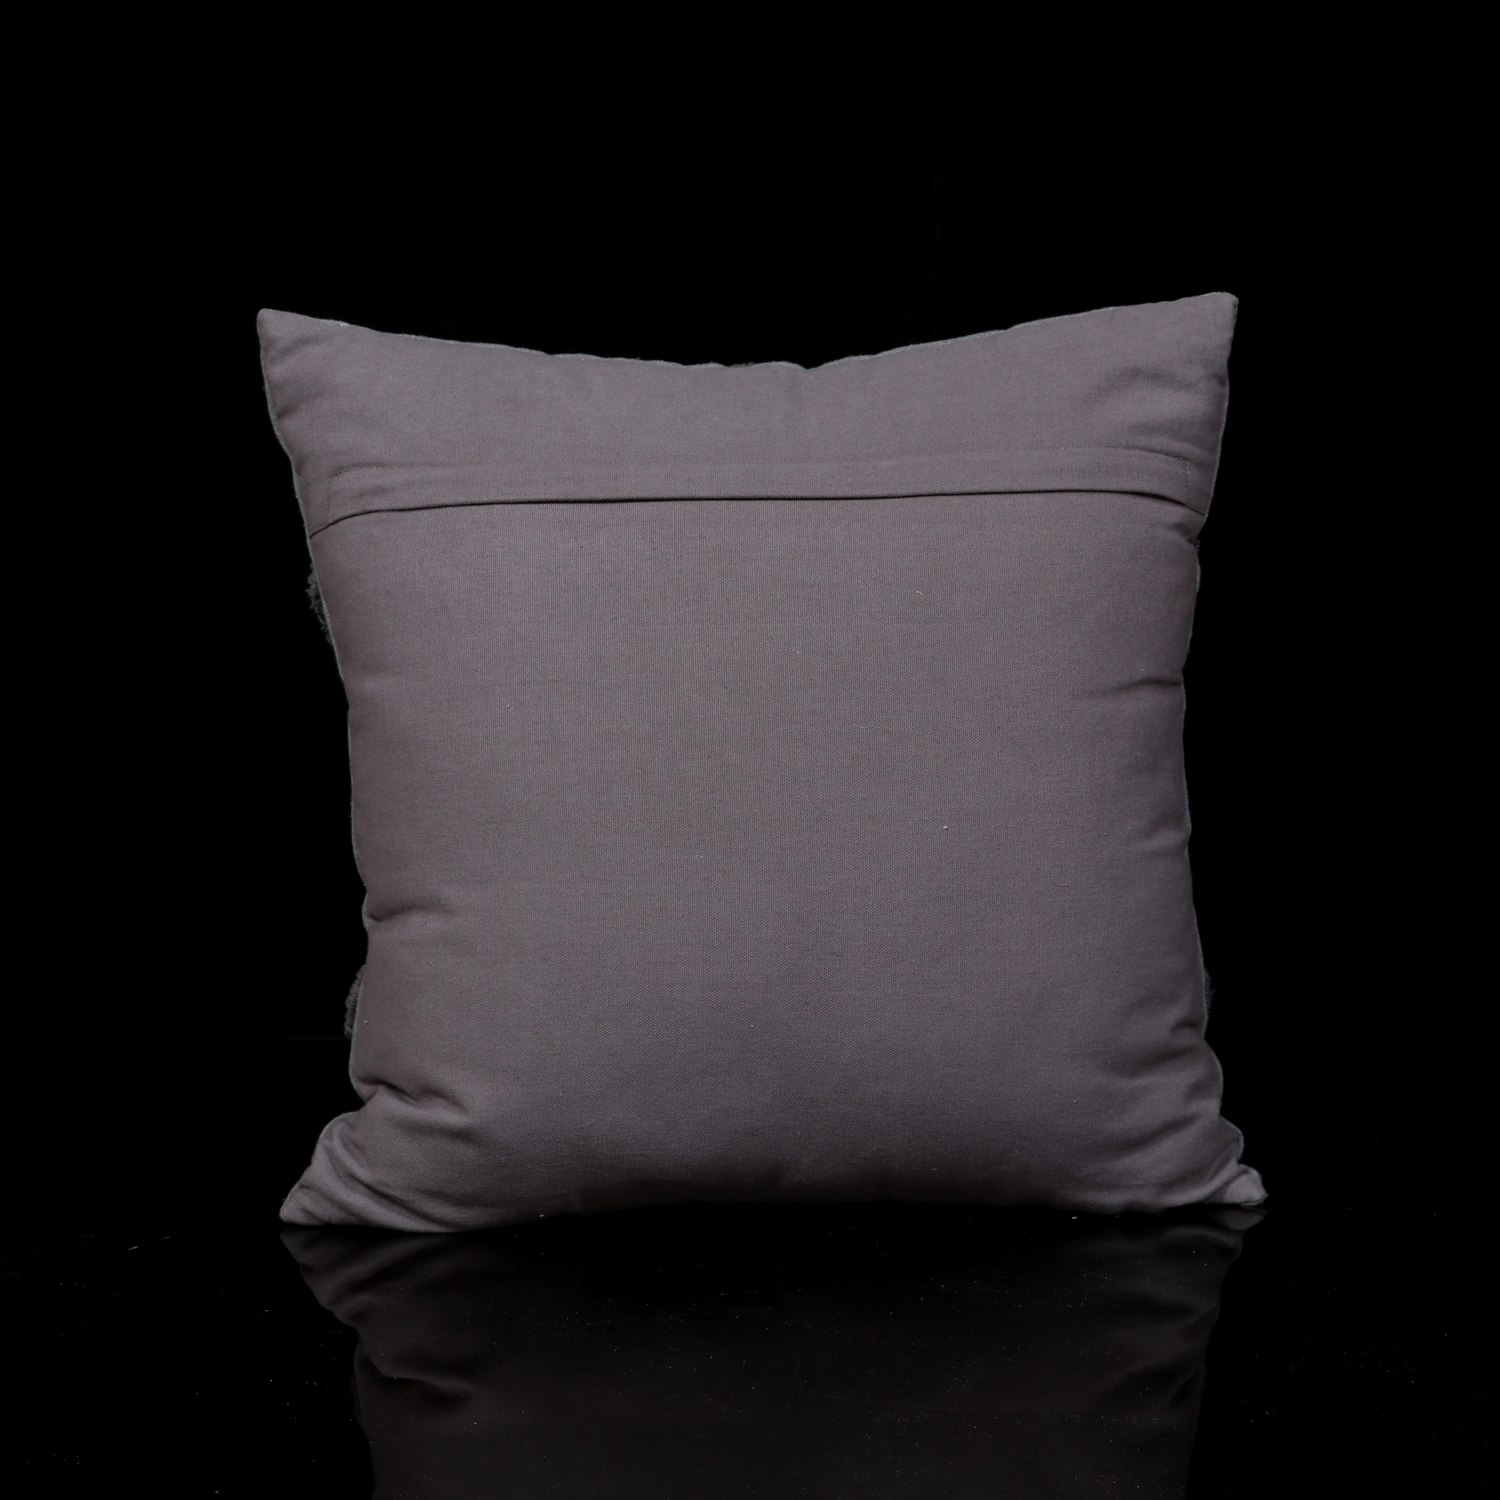 TUFFTED DIAMOND PATTERN PILLOW FILLED WITH STRIPE